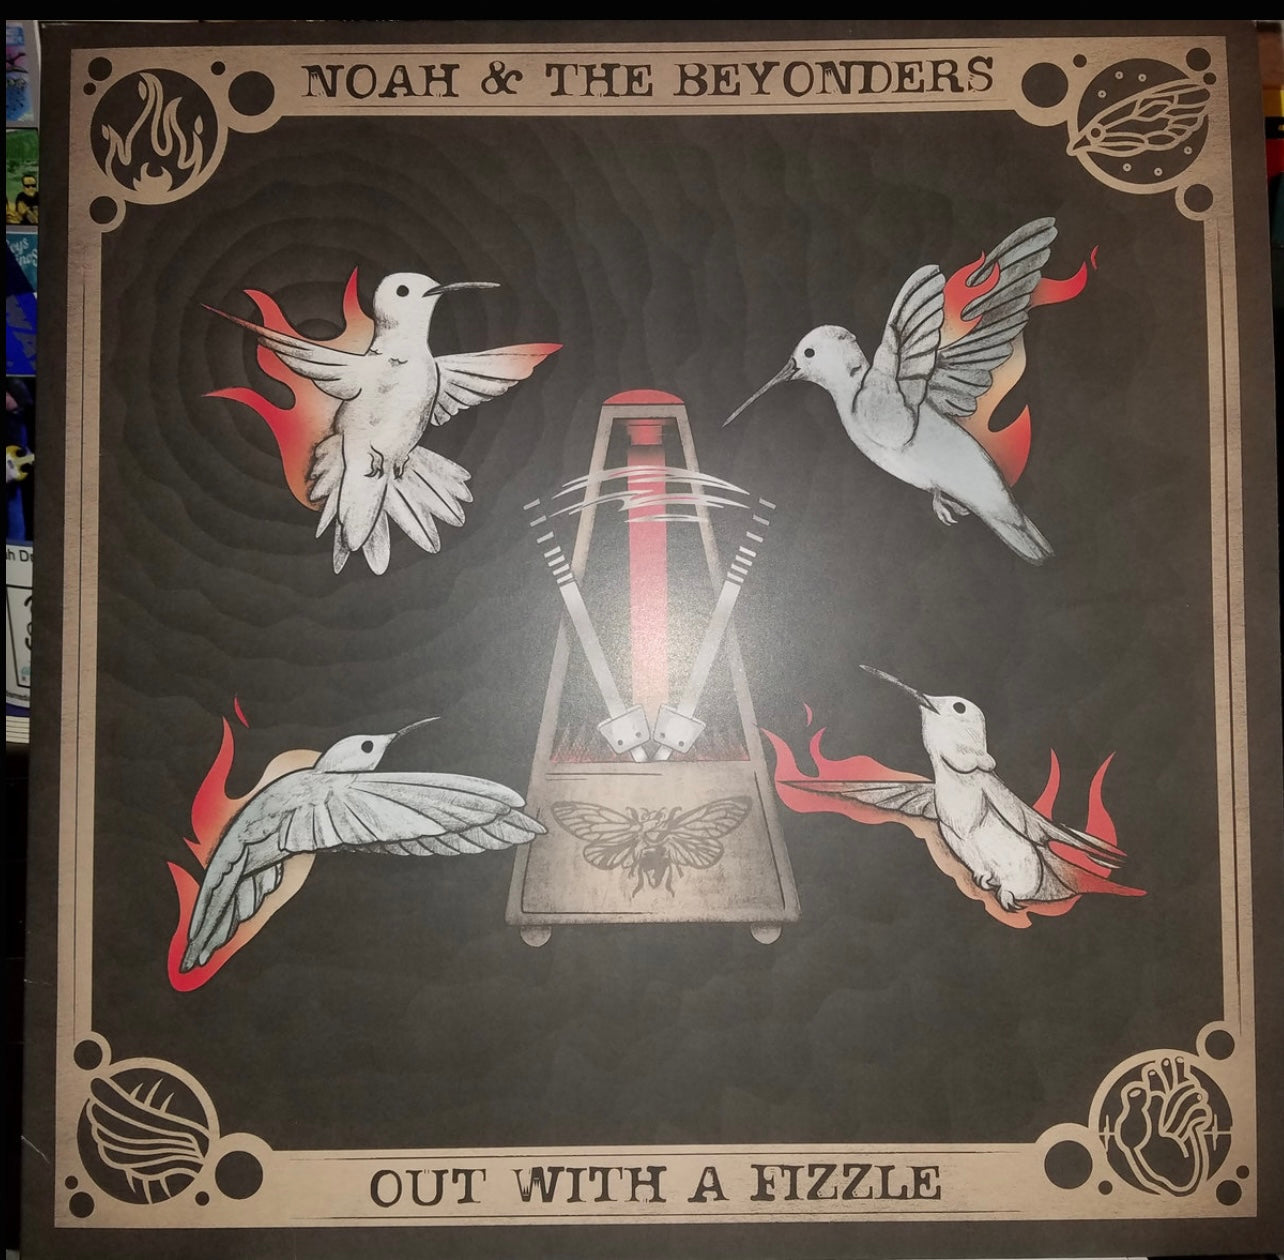 OMR-010 NOAH & THE BEYONDERS “Out With A Fizzle” 12 inch Colored Vinyl